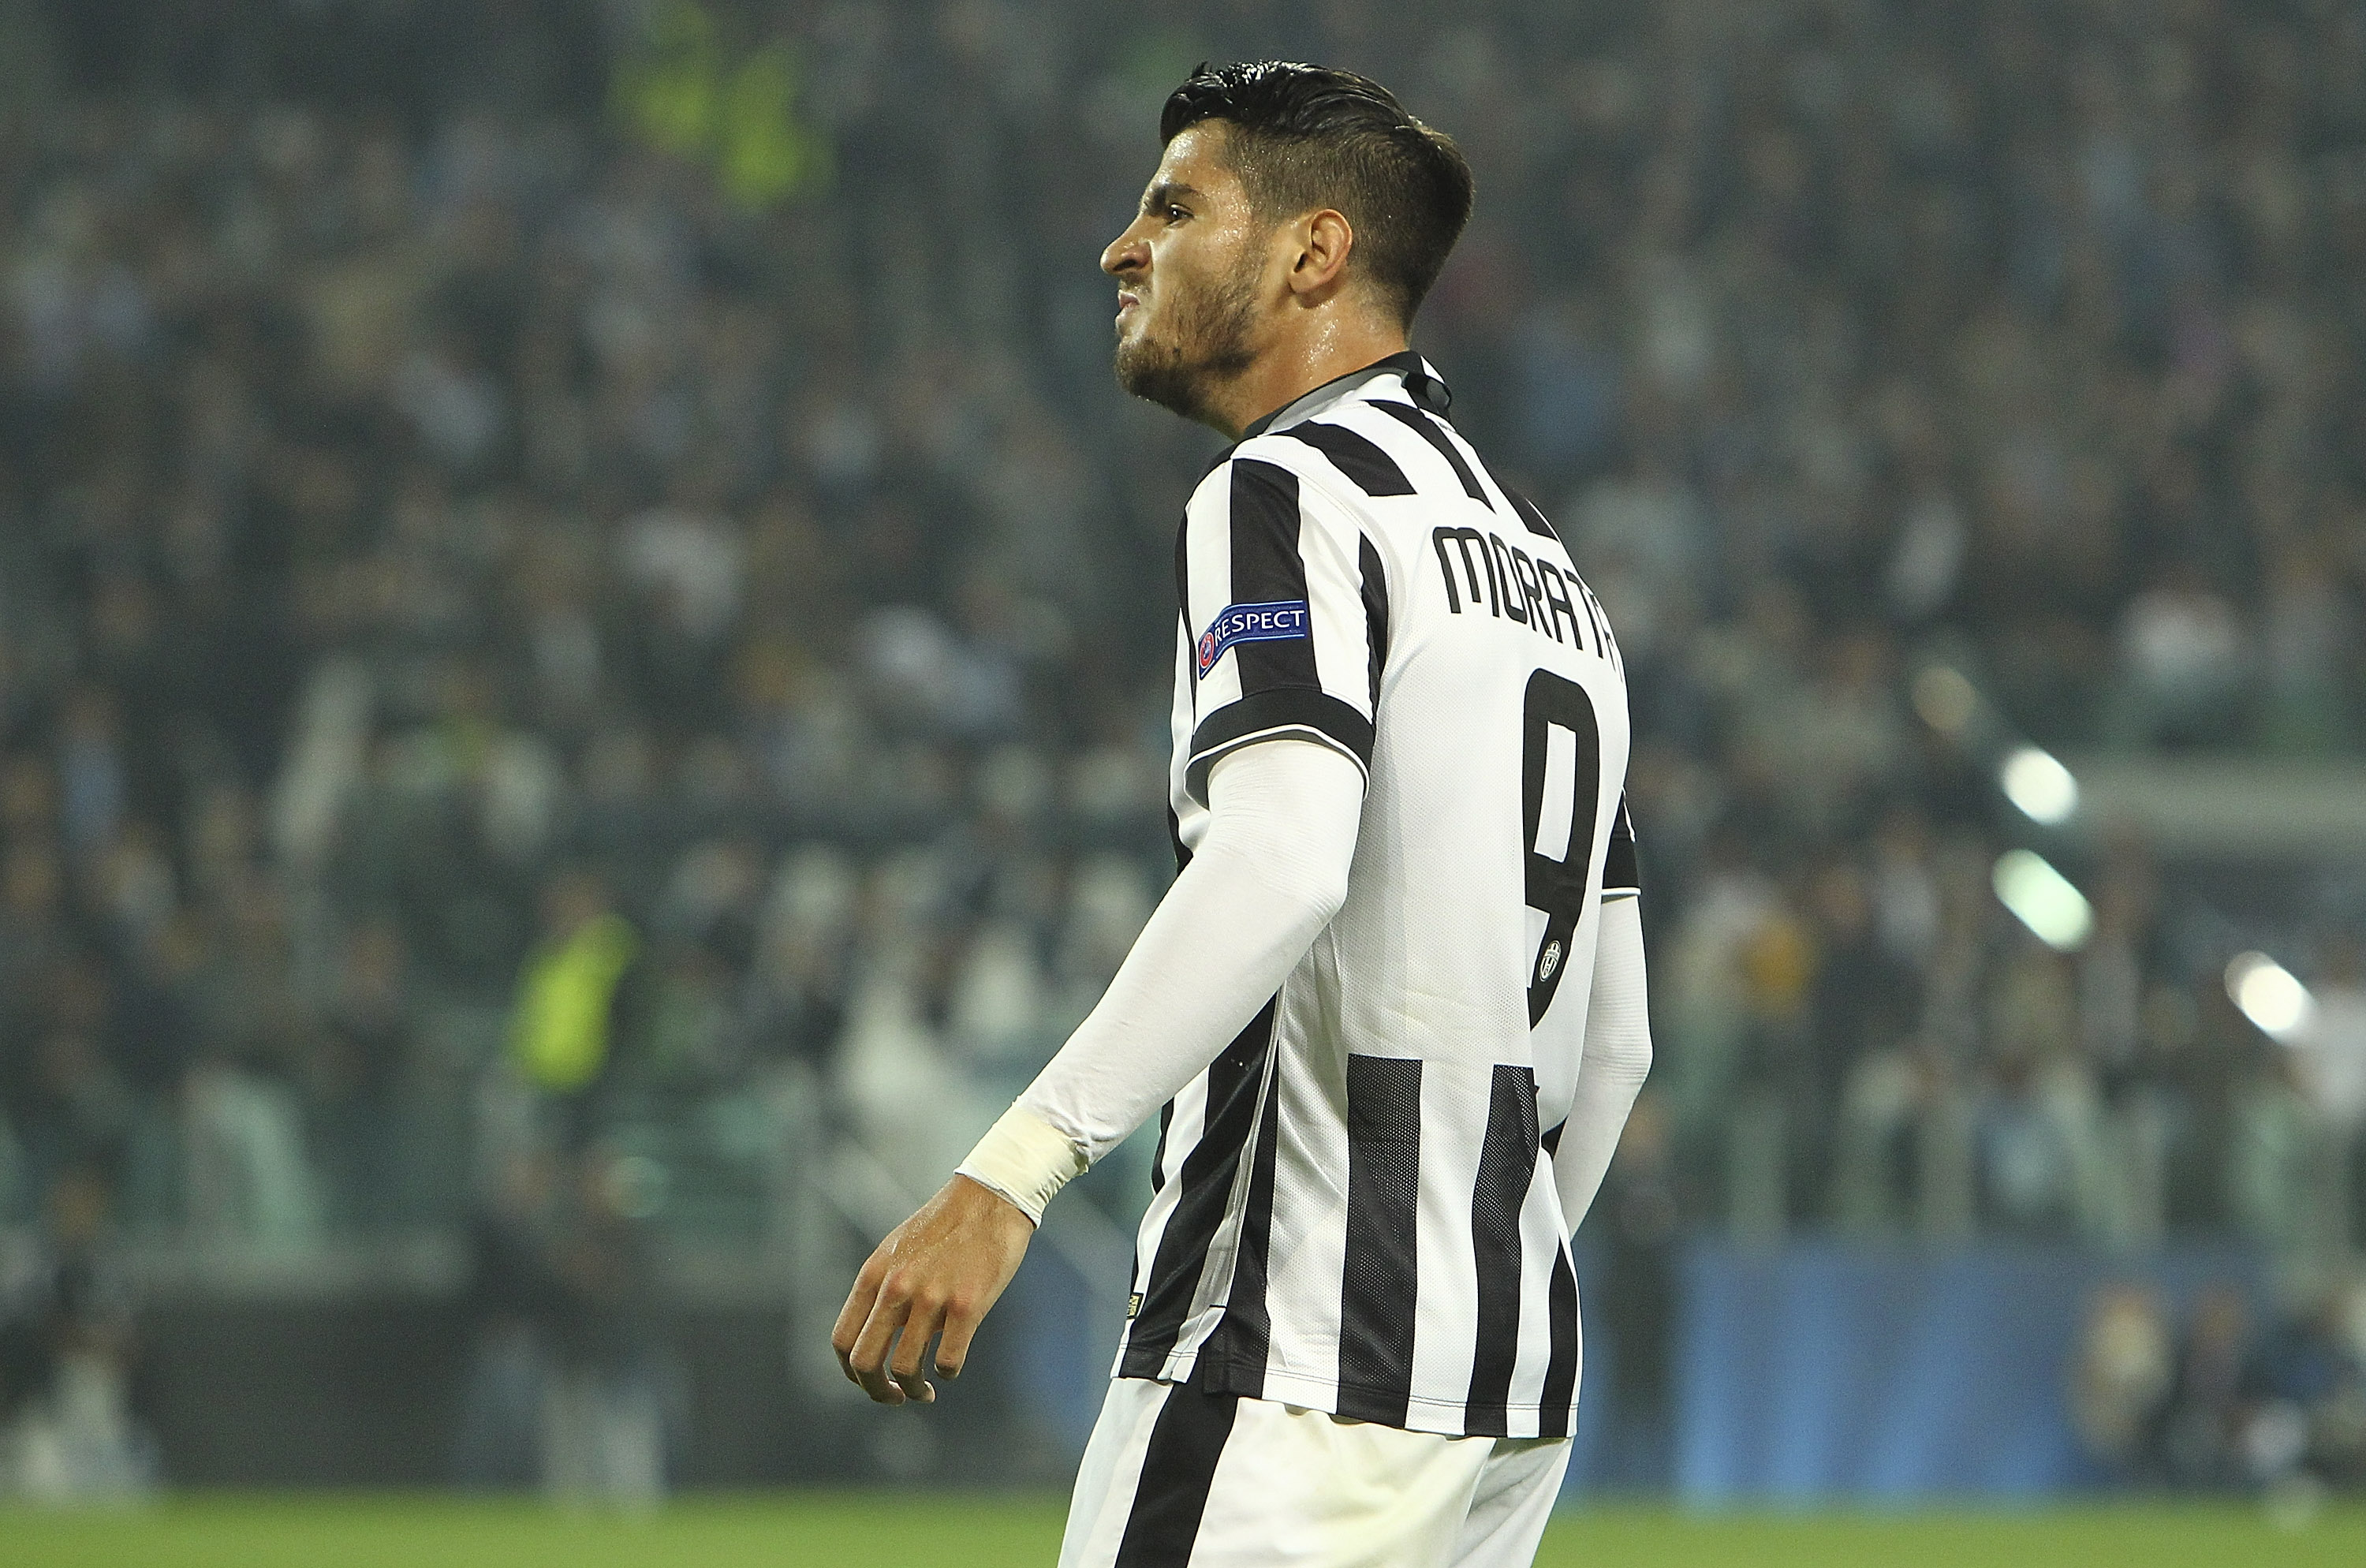 TURIN, ITALY - MAY 05:  Alvaro Morata of Juventus FC celebrates after scoring the opening goal during the UEFA Champions League semi final match between Juventus and Real Madrid CF at Juventus Arena on May 5, 2015 in Turin, Italy.  (Photo by Marco Luzzani/Getty Images)